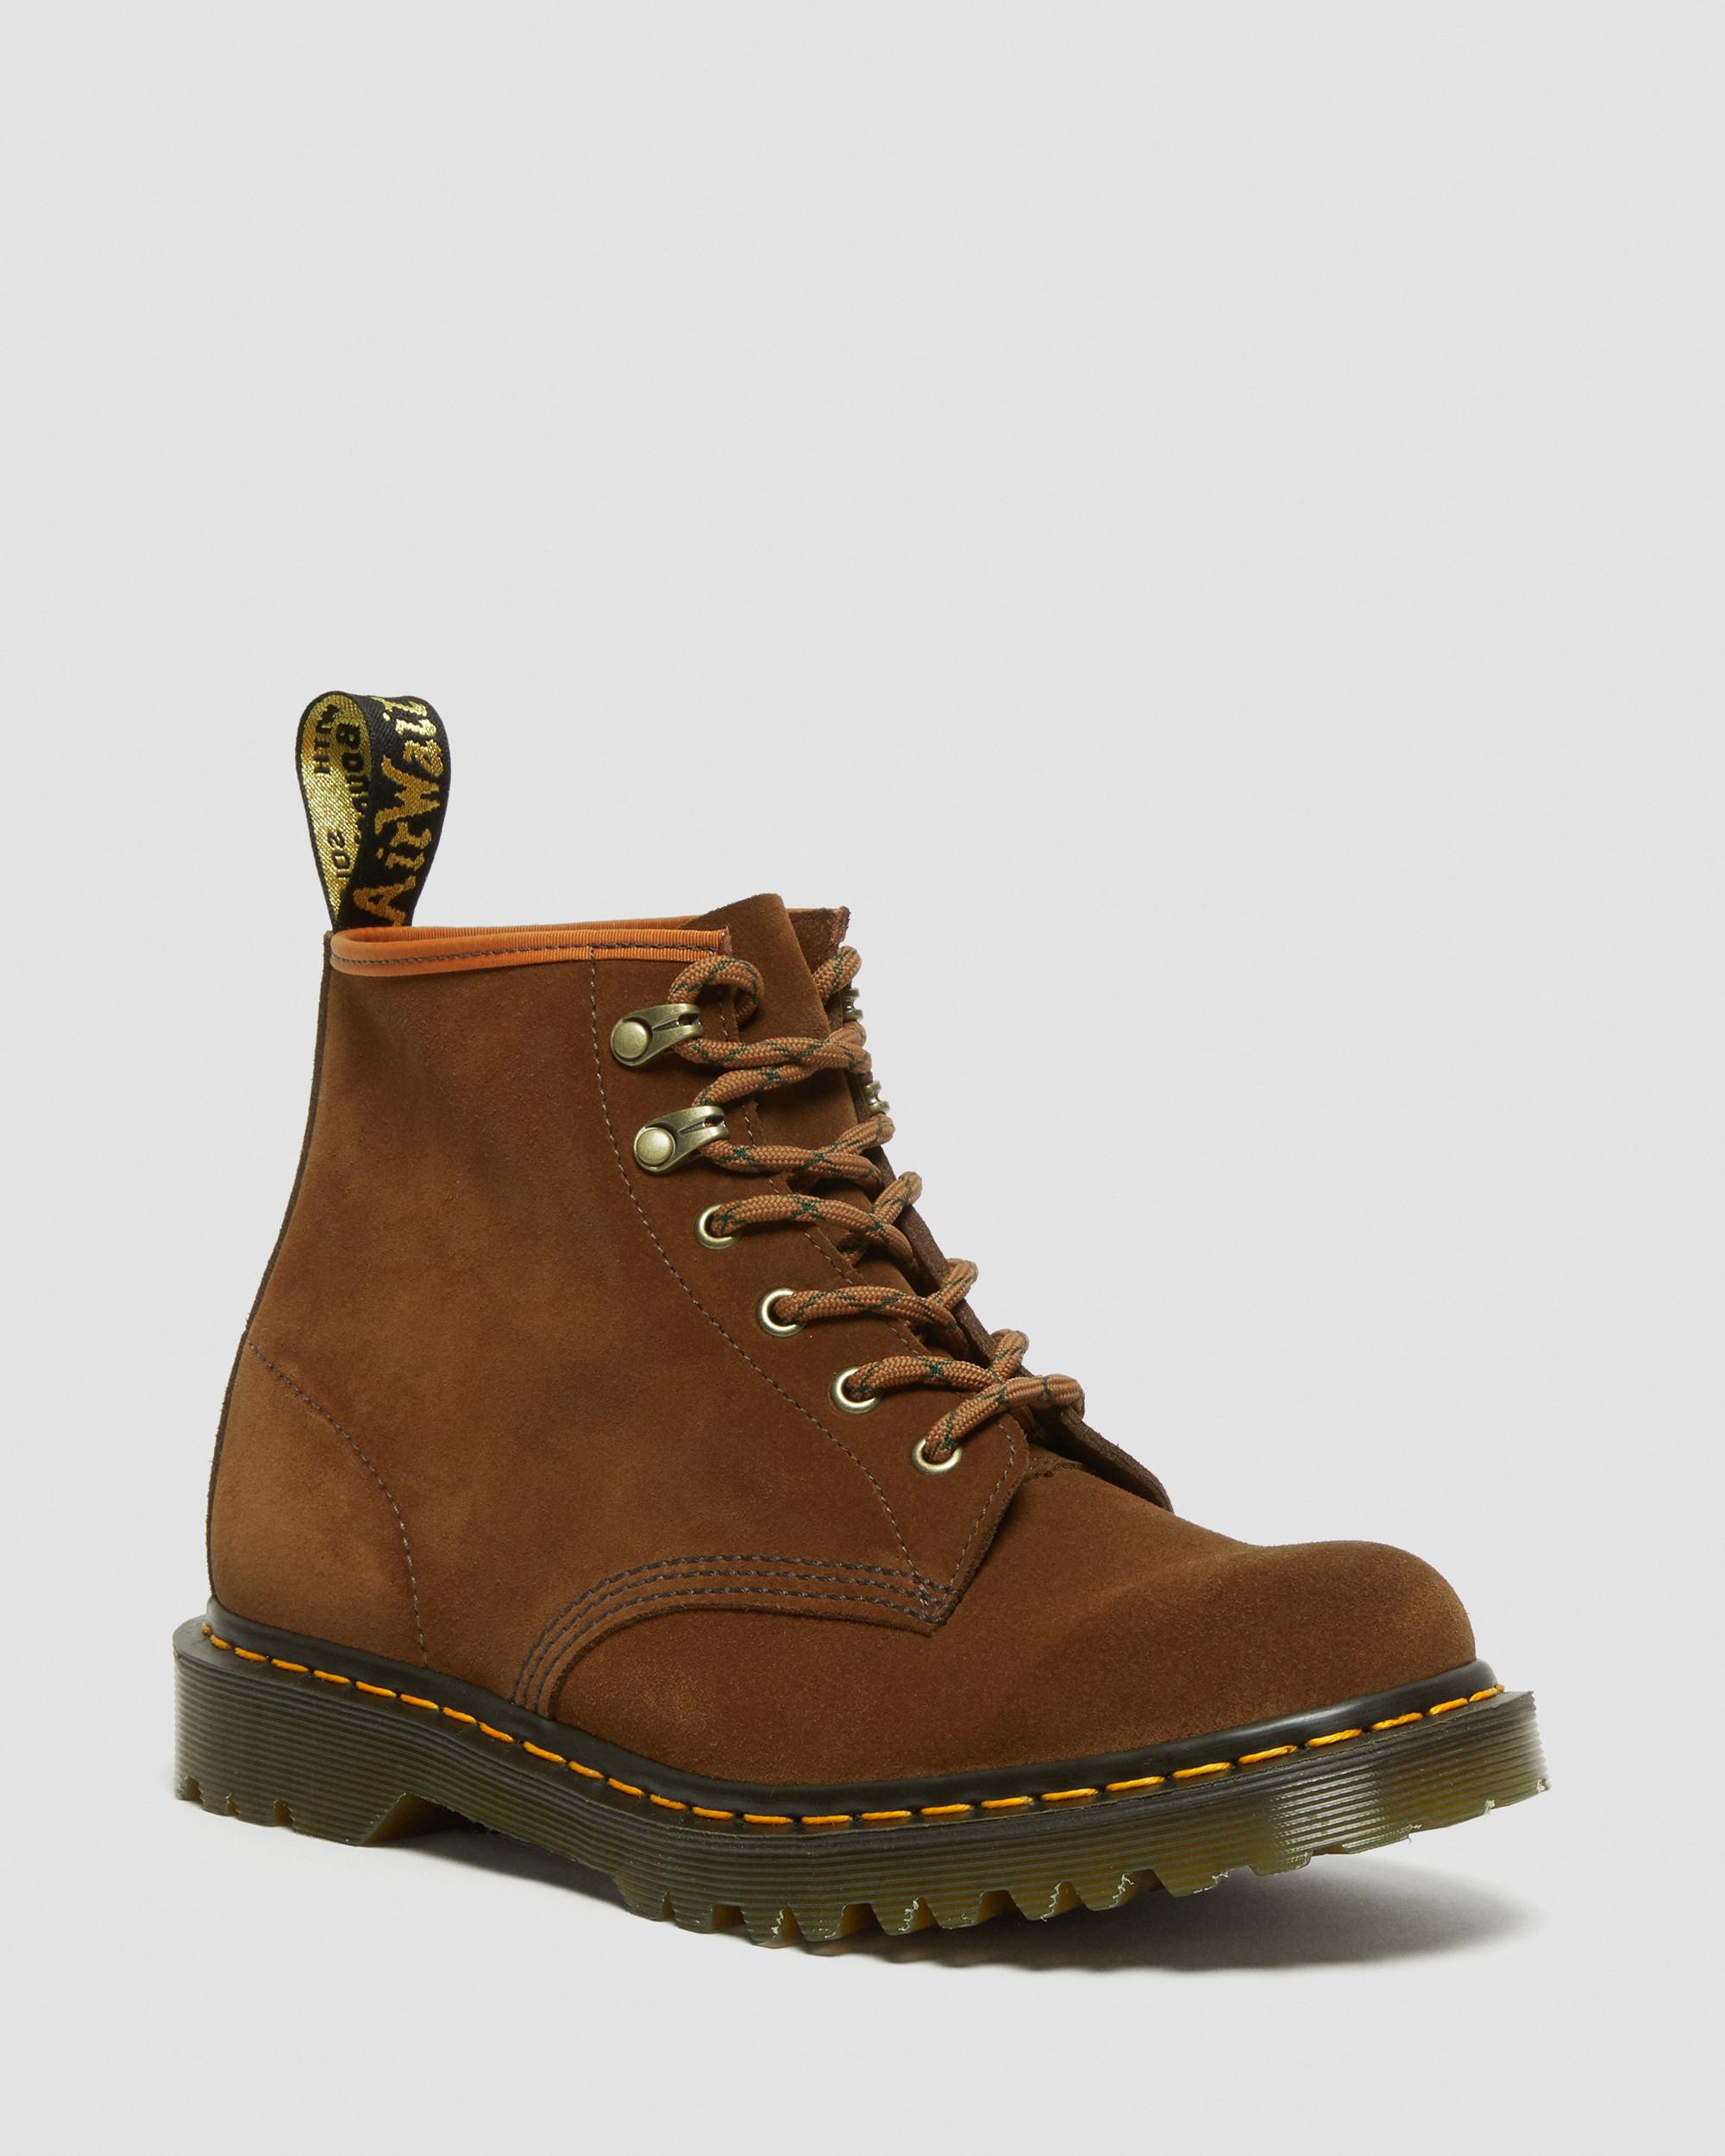 101 Made in England Ben Suede Ankle Boots101 Made in England Ben Suede Ankle Boots Dr. Martens